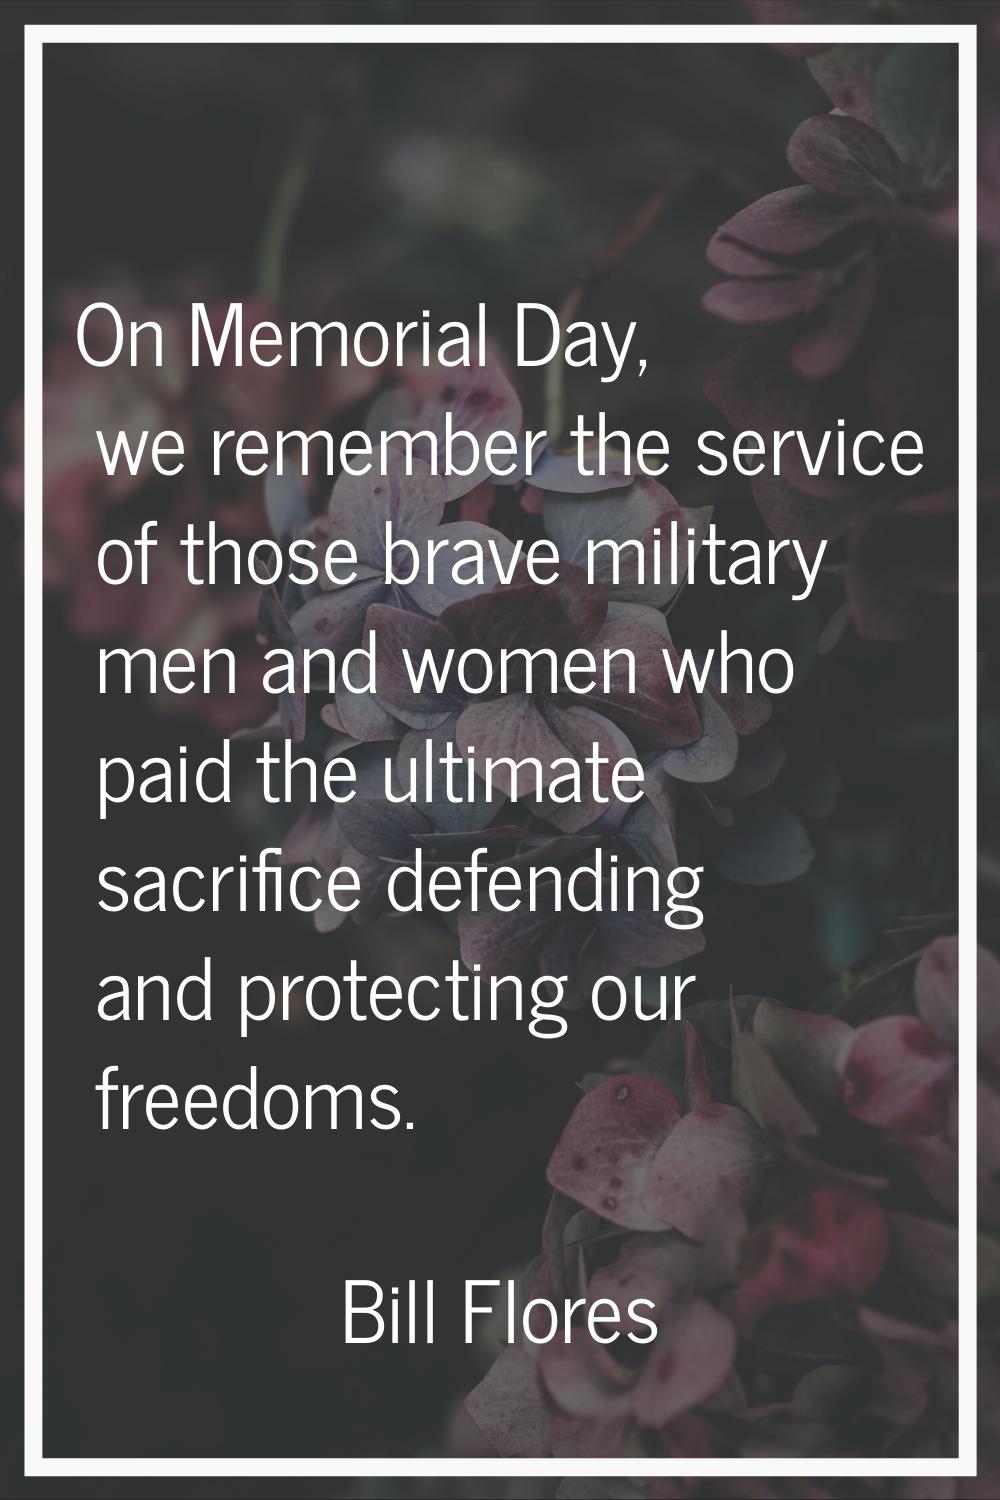 On Memorial Day, we remember the service of those brave military men and women who paid the ultimat